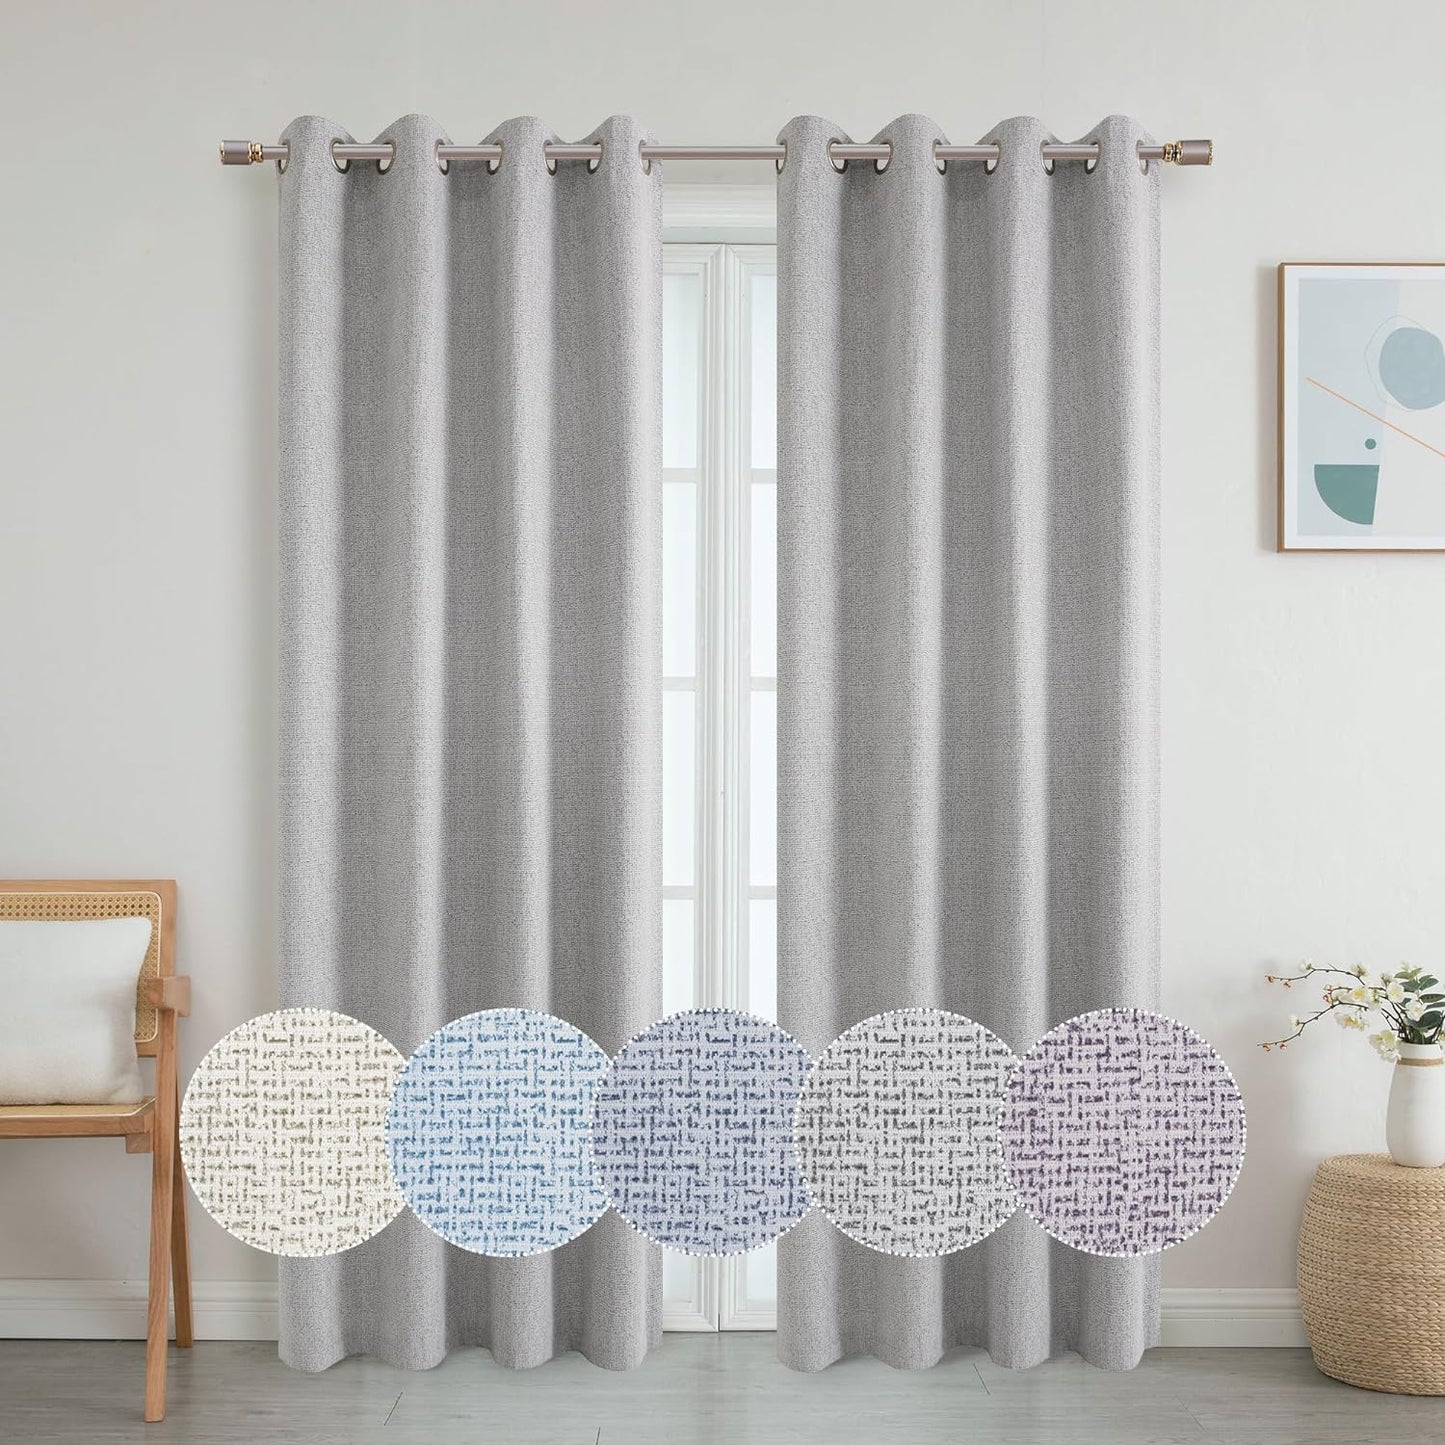 OWENIE Luke Black Out Curtains 63 Inch Long 2 Panels for Bedroom, Geometric Printed Completely Blackout Room Darkening Curtains, Grommet Thermal Insulated Living Room Curtain, 2 PCS, Each 42Wx63L Inch  OWENIE Grey 42"W X 84"L | 2 Pcs 